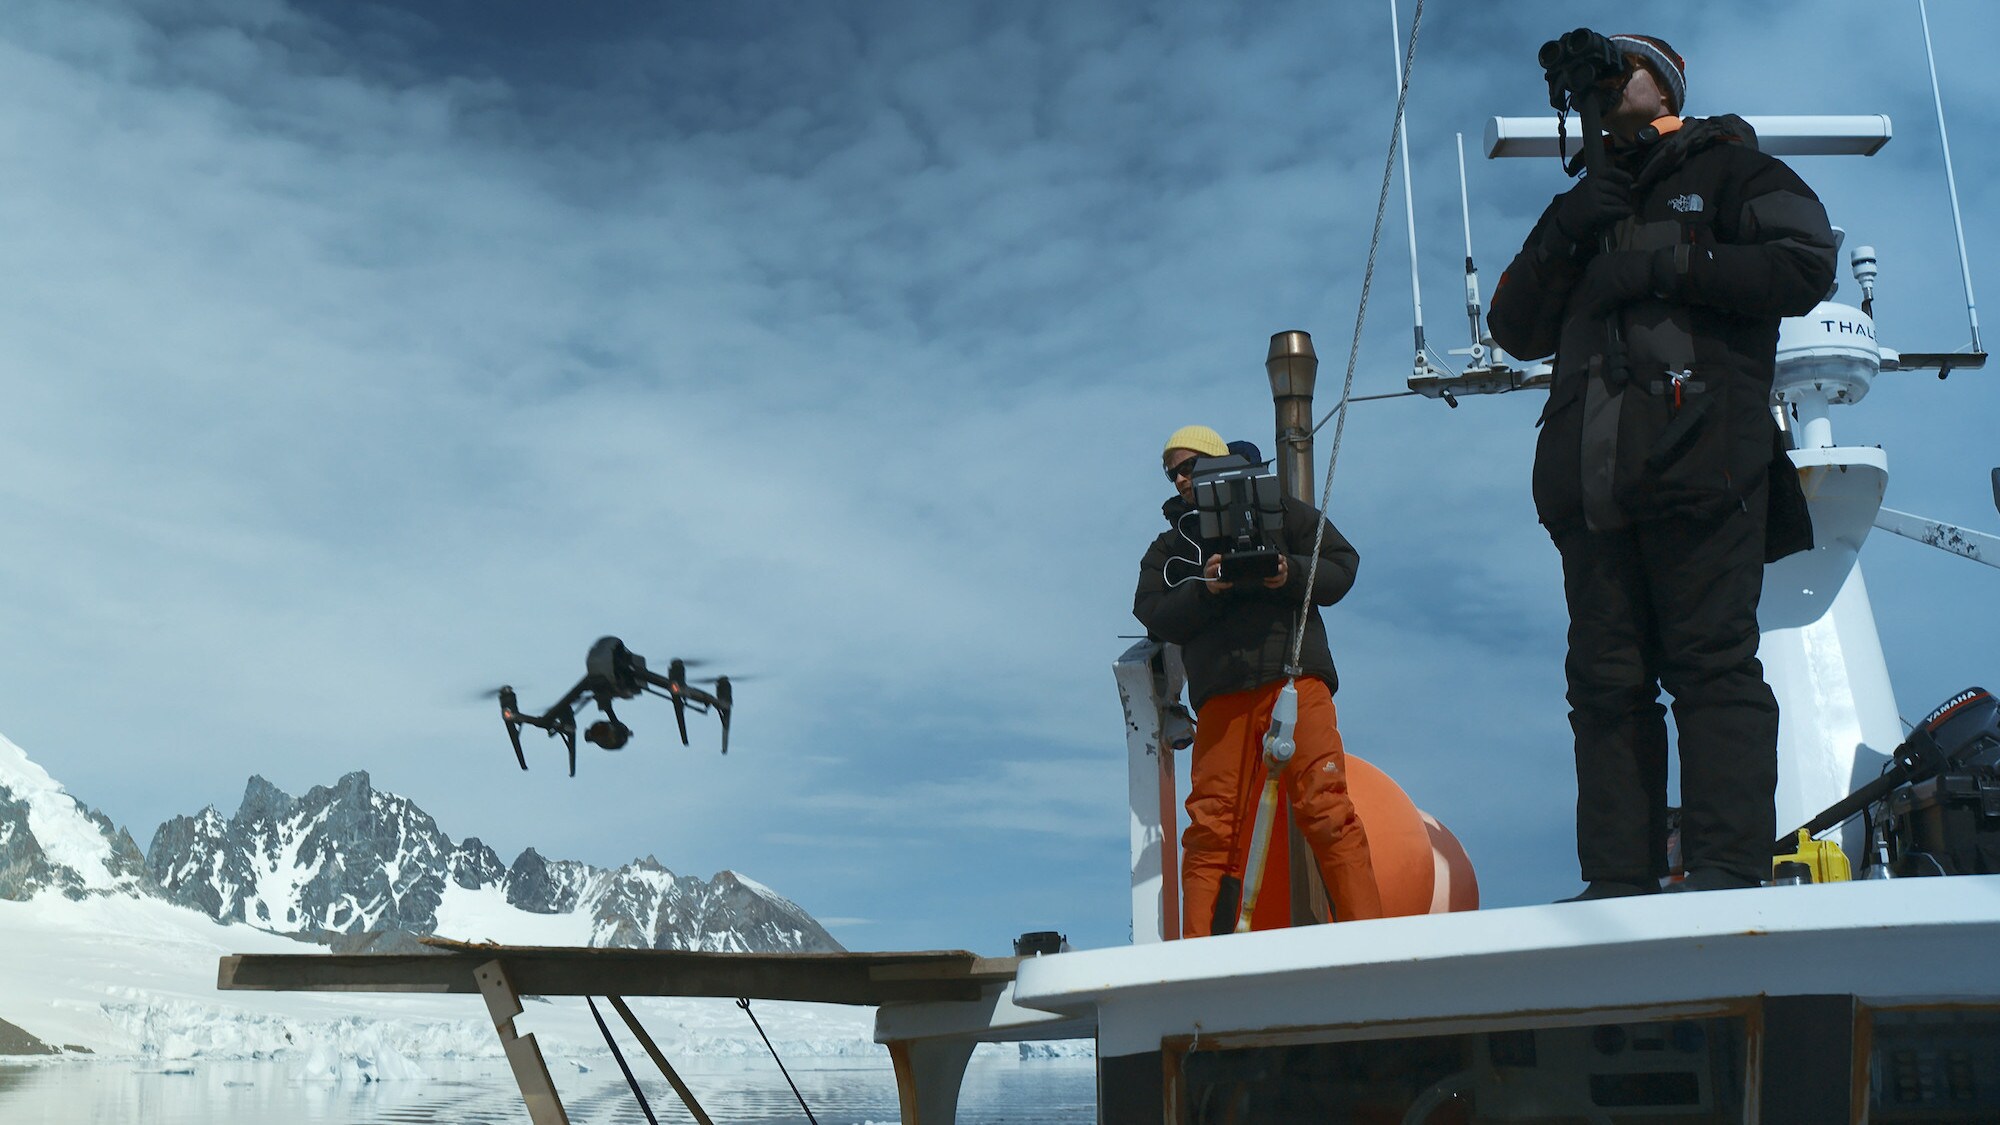 Bertie Gregory flying a drone from the side of the Australis. (credit: National Geographic for Disney+/Will West)